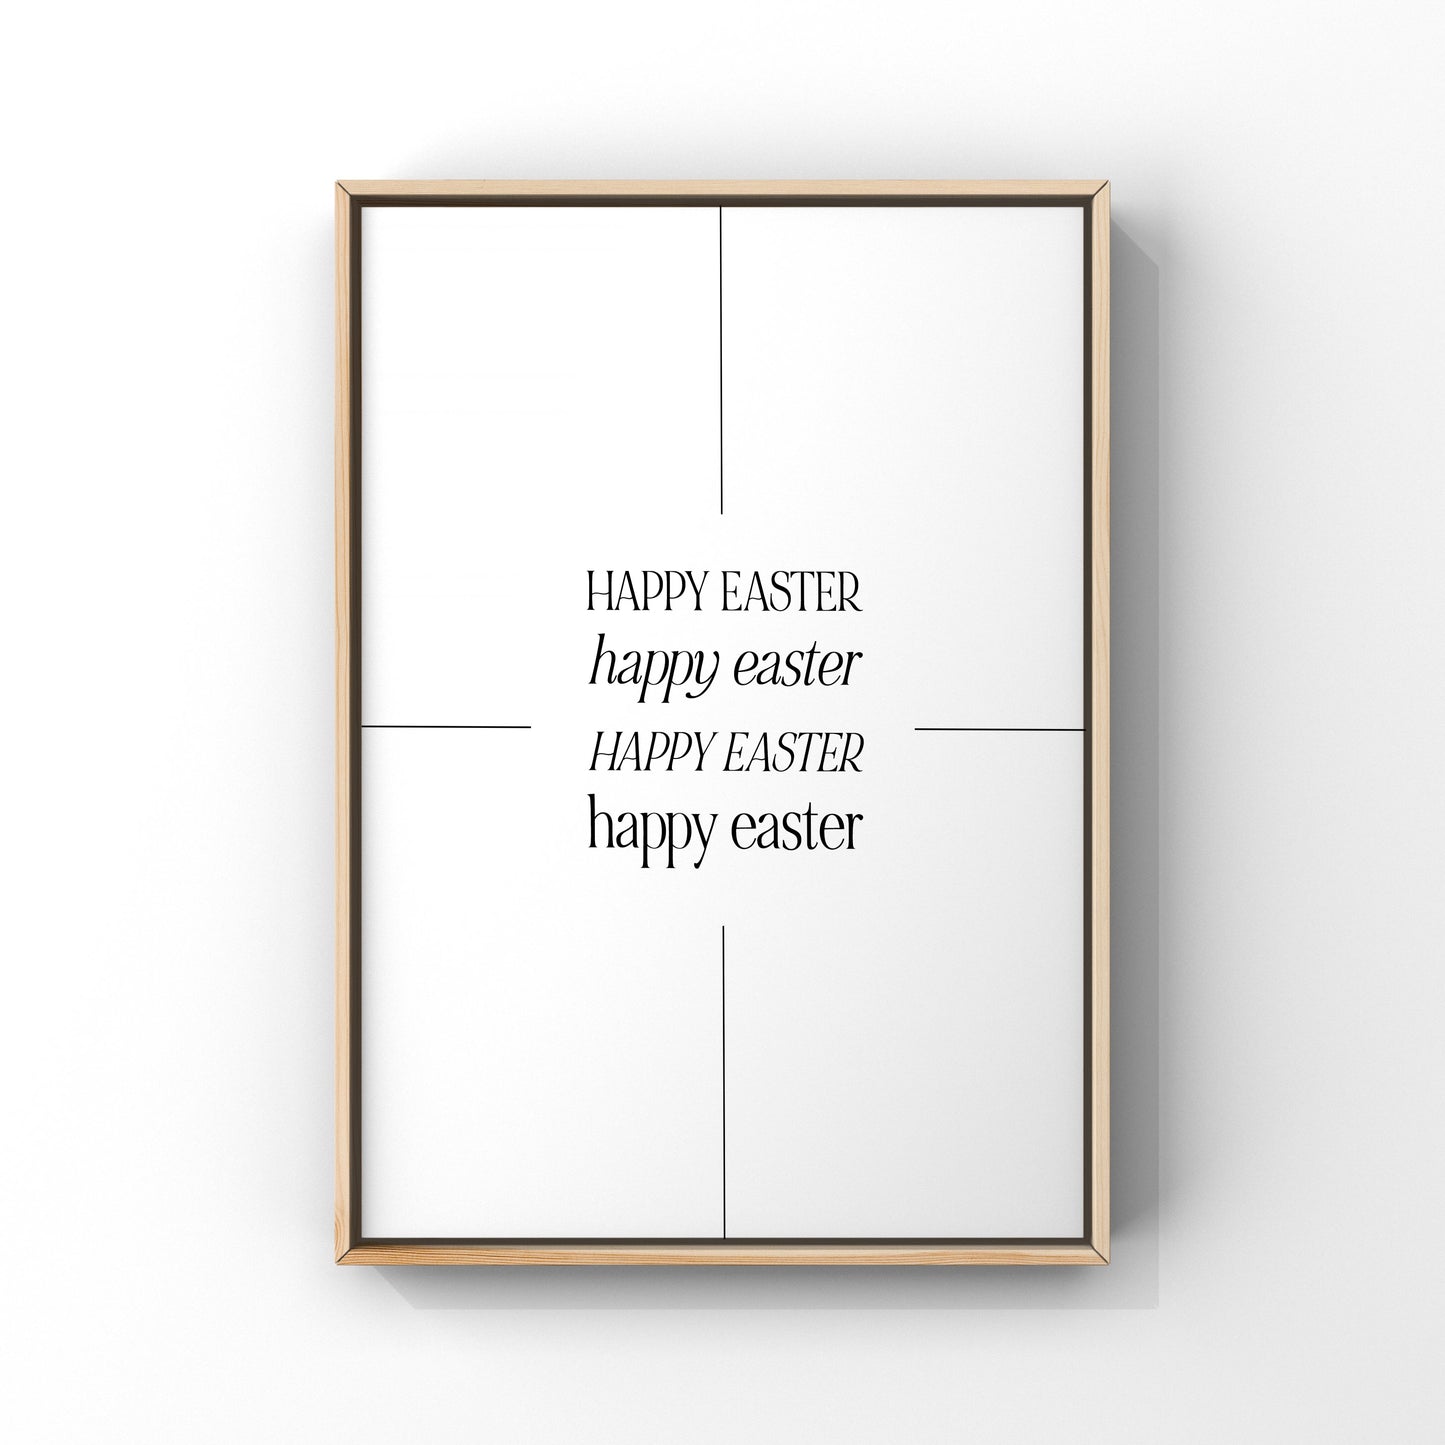 Happy Easter, Easter print, Easter wall art, Easter home decor, Easter typography print, Easter decorations